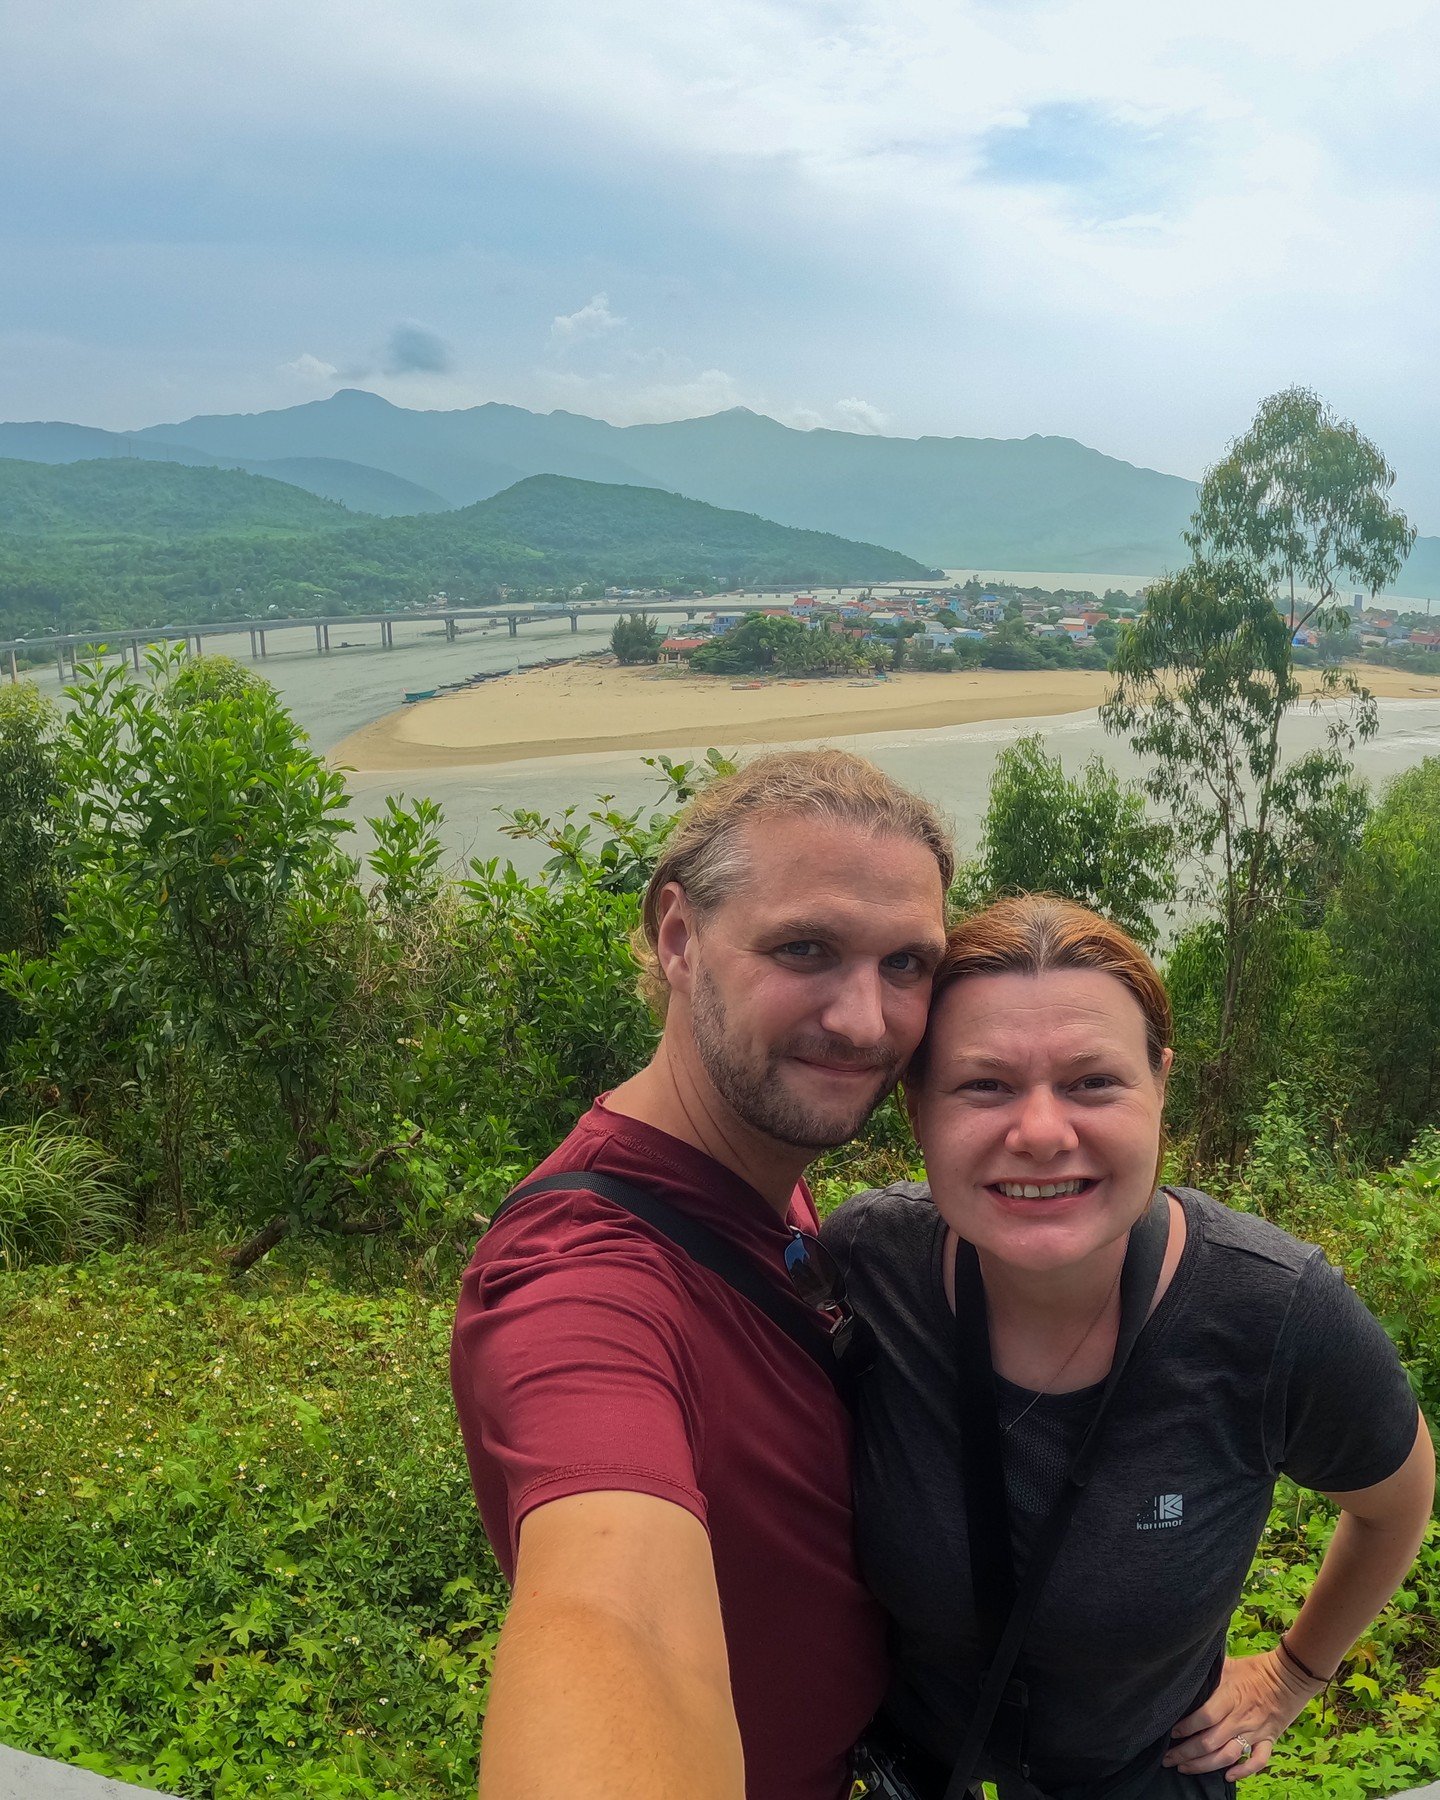 8 years apart - standing on the edge of the Hai Van Pass for a selfie! 

Lots has changed in the world since we first came to Vietnam 8 years ago, but the Hai Van Pass is still an incredible road!

Last time we came here with an organised tour on a c